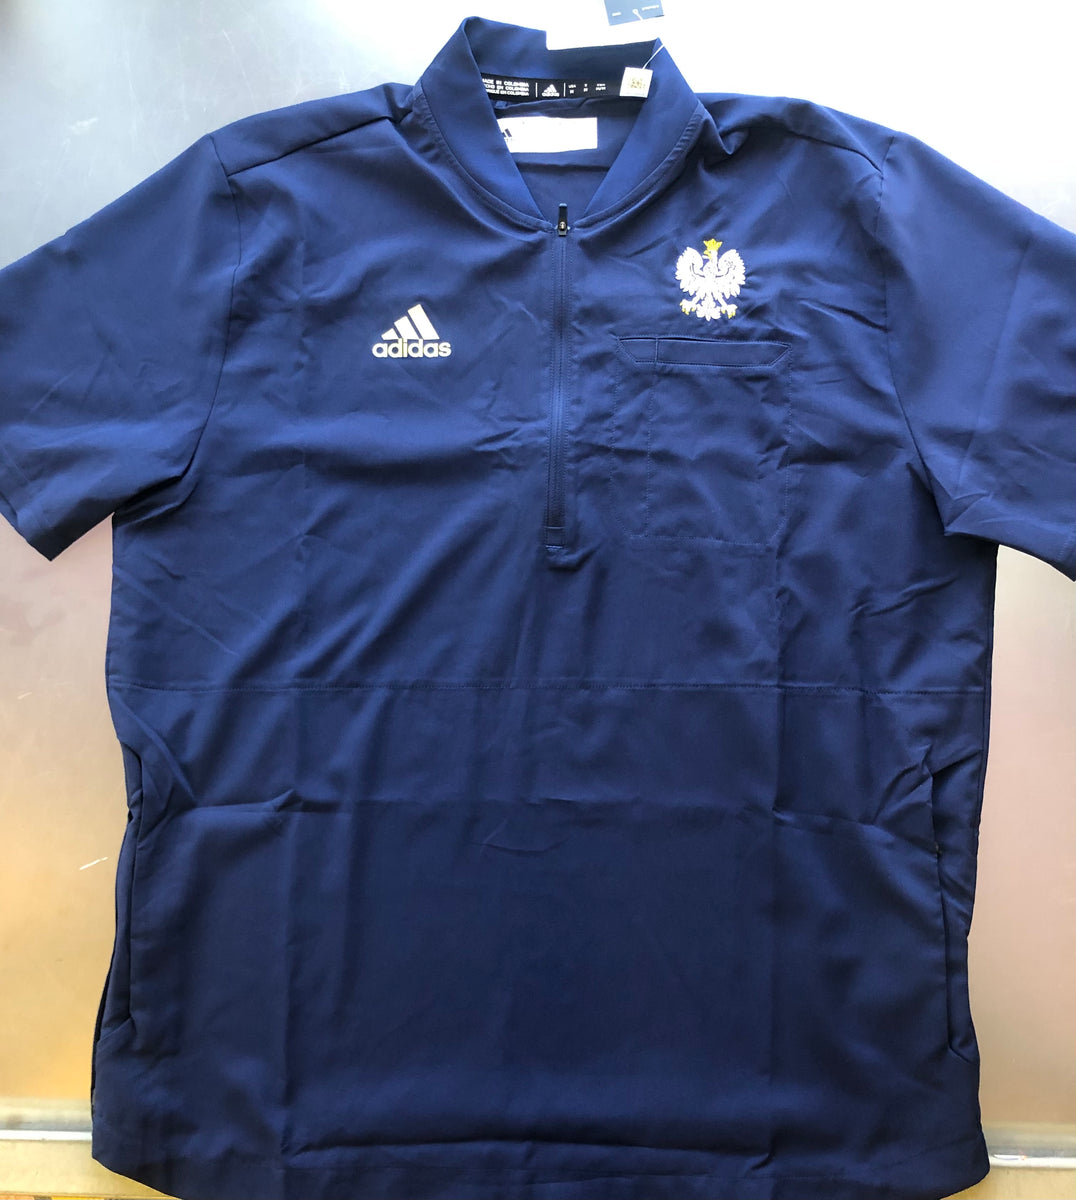 Toronto Maple Leafs full zip track jacket women's small Adidas NEW with Tags